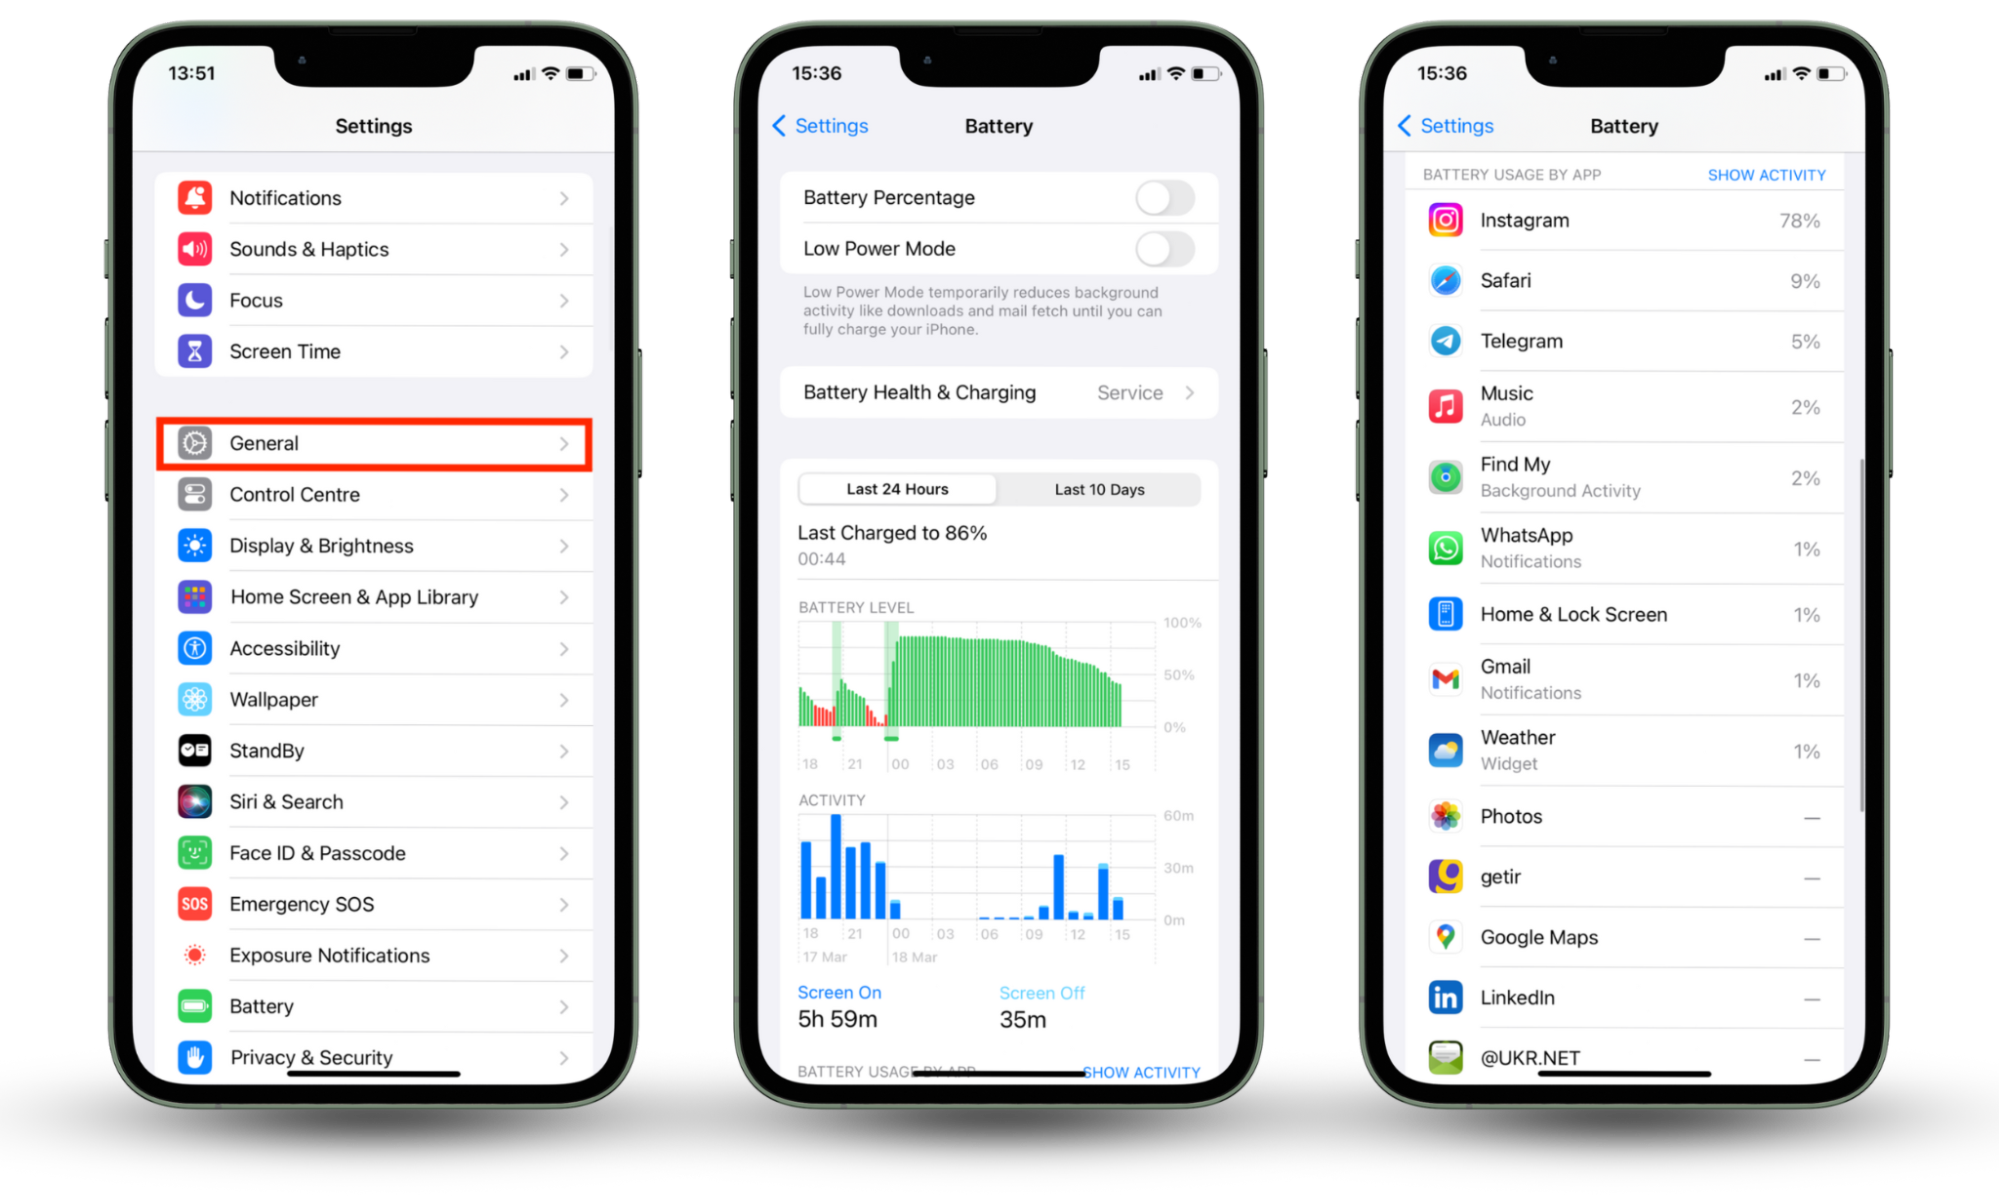 Battery problems are a sign that your iPhone is tapped. To check your iPhone's battery usage, go to Settings > Battery, then scroll down for more information.